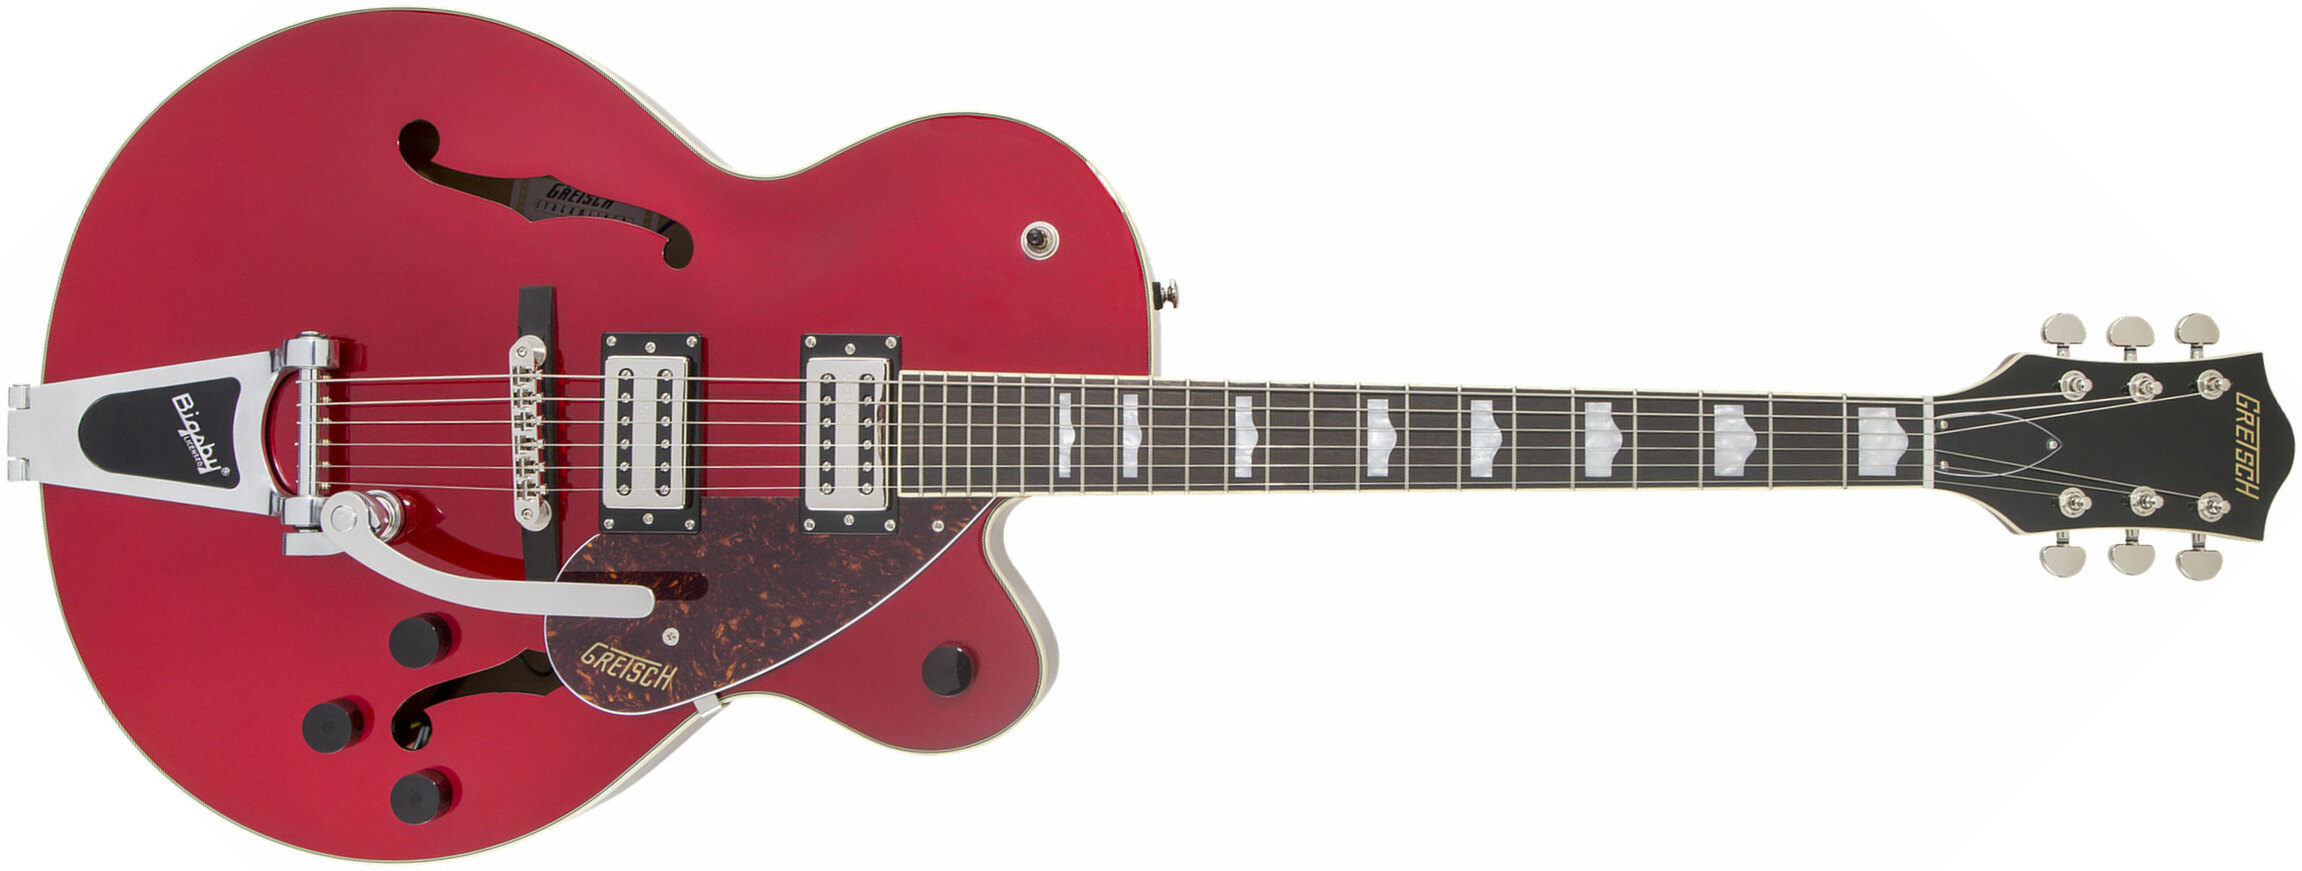 Gretsch G2420t Streamliner Hollow Body Bigsby Hh Trem Lau - Candy Apple Red - Guitare Électrique 1/2 Caisse - Main picture